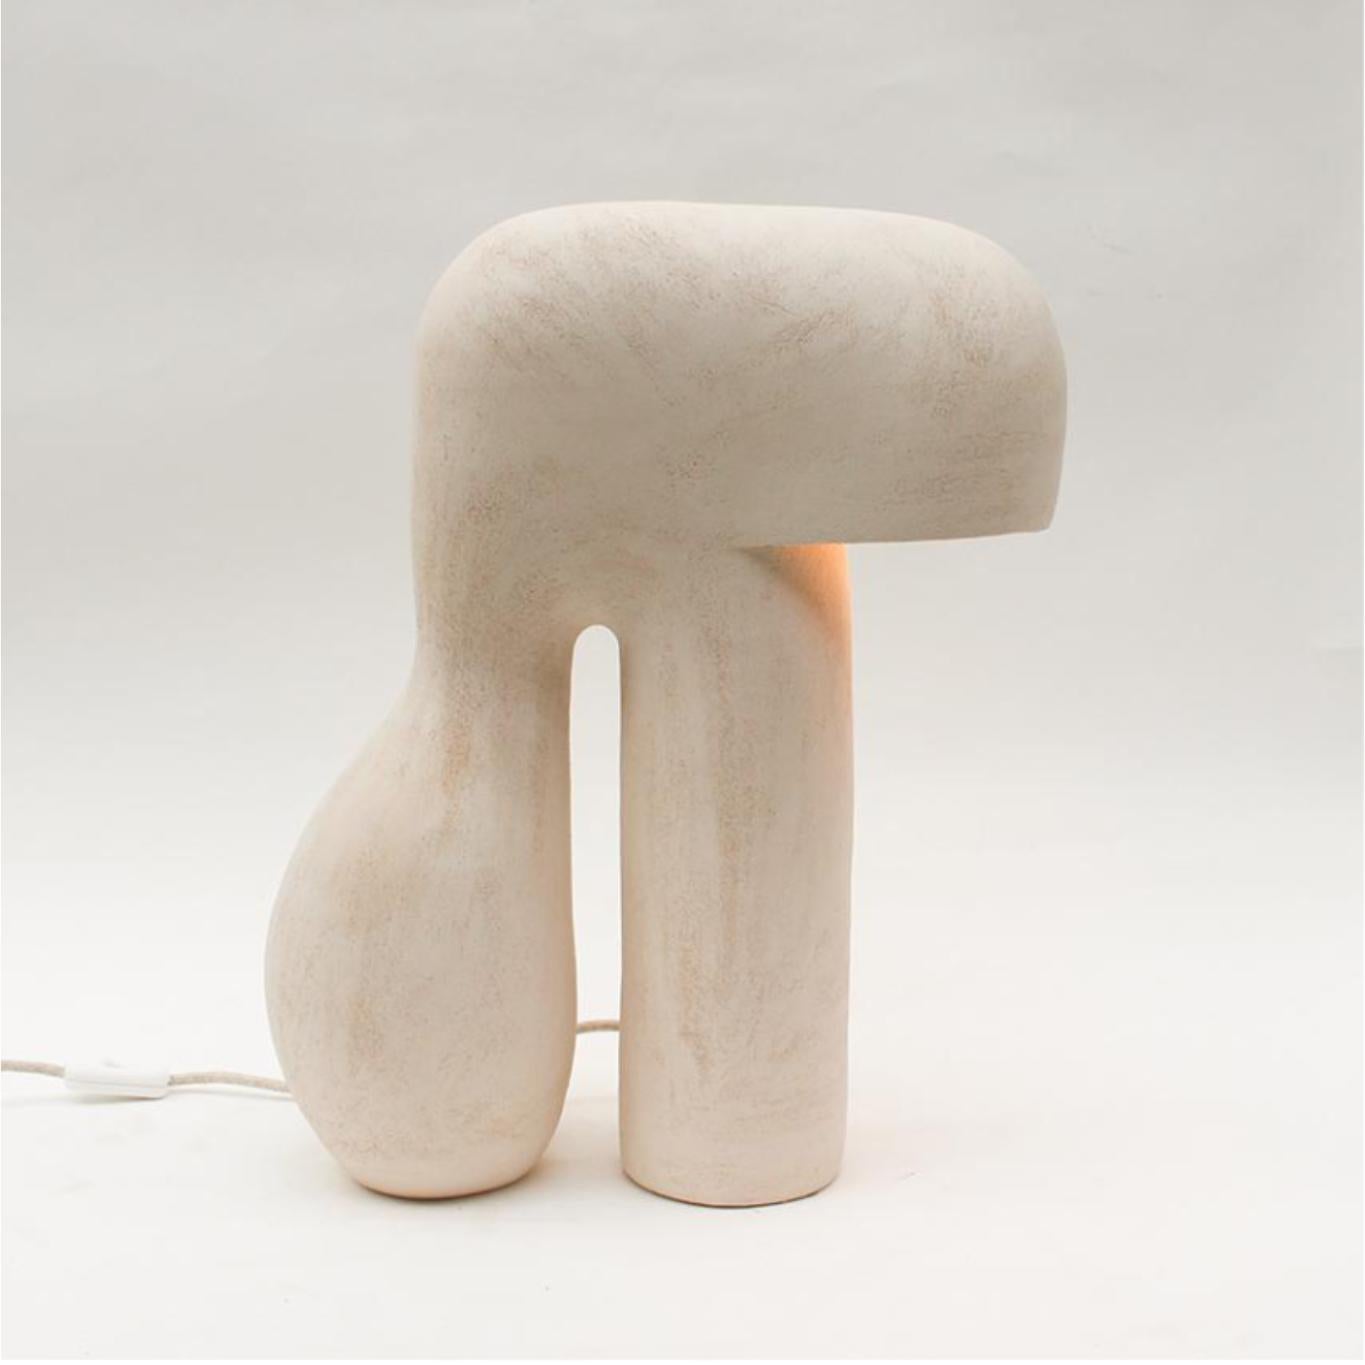 Baume #1 Stoneware lamp by Elisa Uberti
Unique Piece
Dimensions: 15 D x 40 W x H 50 cm
Materials: White Stoneware
This product is handmade, dimensions may vary.

After fifteen years in fashion, Elisa Uberti decides to take the time to work with